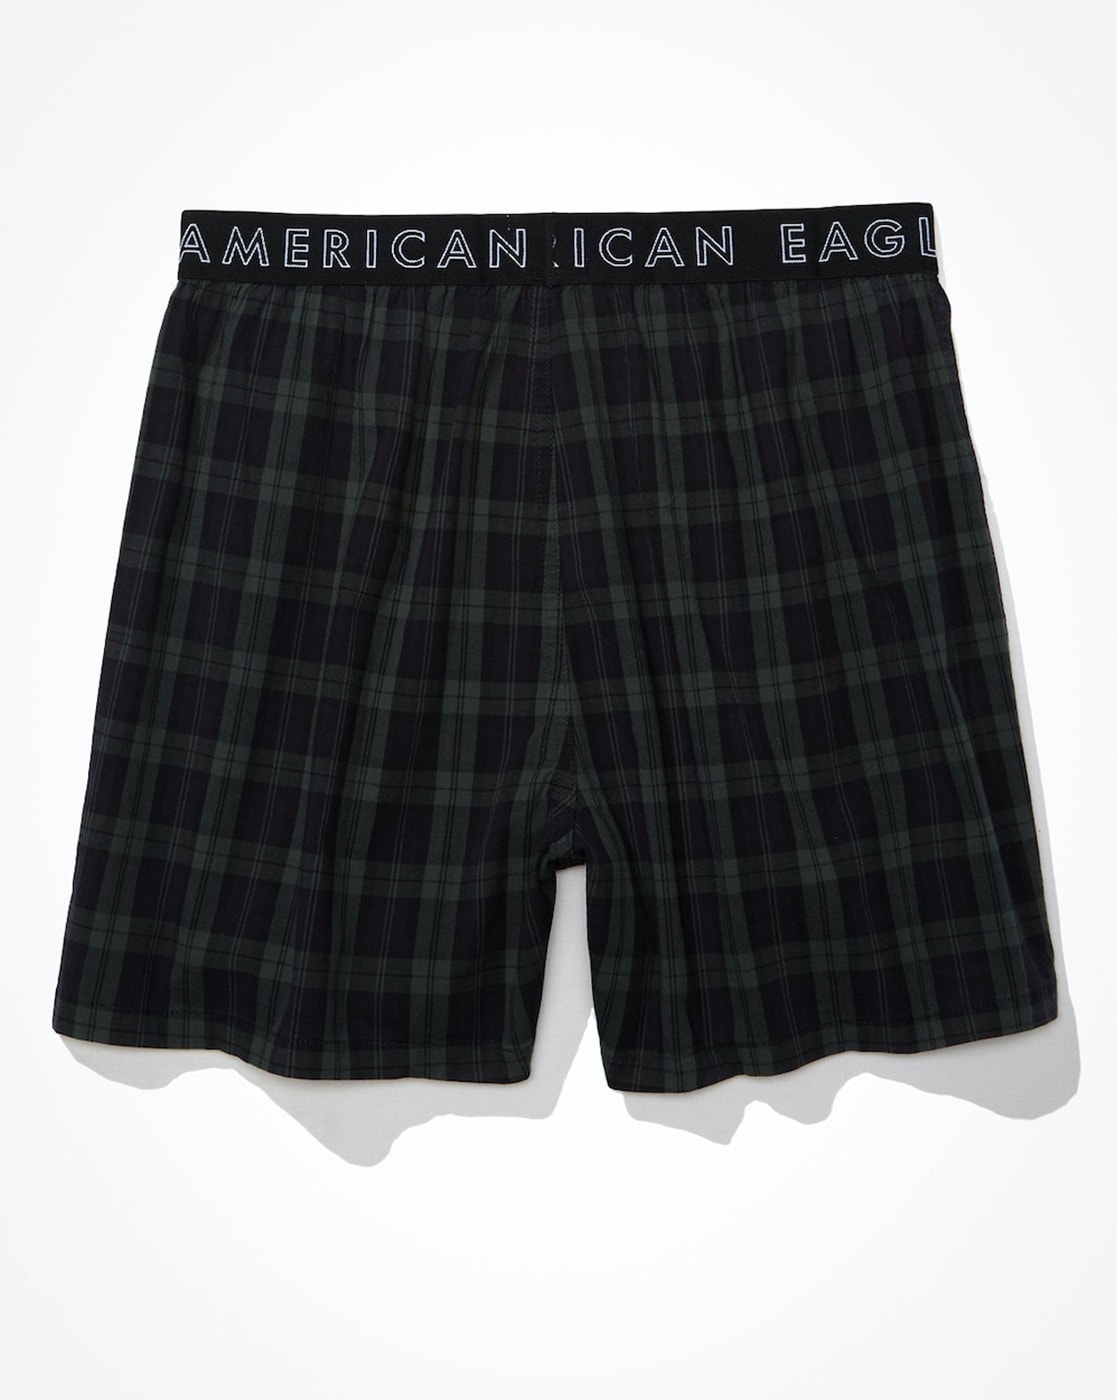 Pin on American eagle boxers